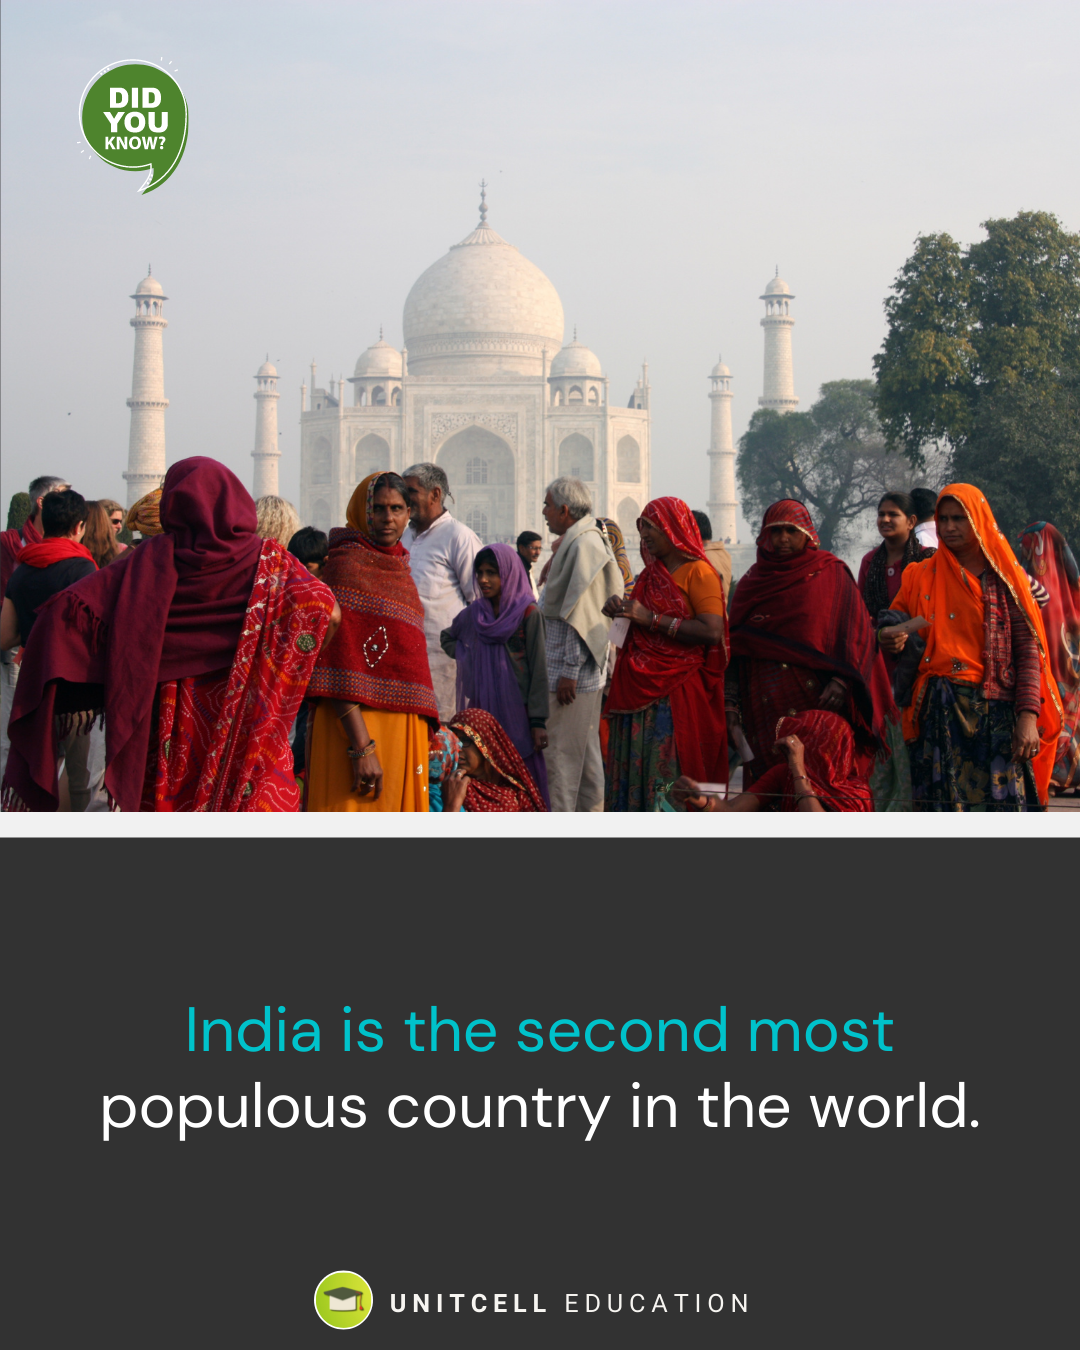 India is the second most populous country in the world.